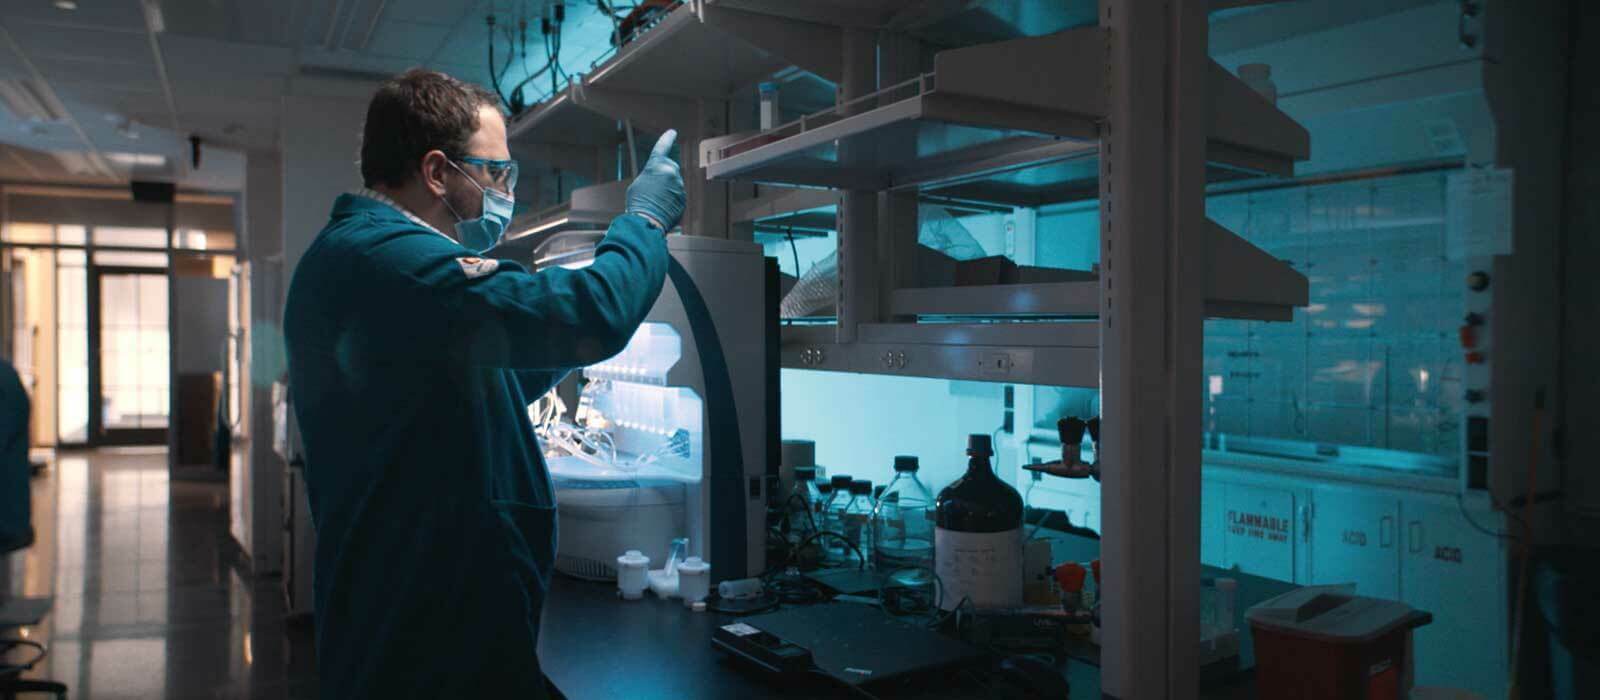 A researcher stands in a dimly-lit lab, filling a test tube using a syringe.